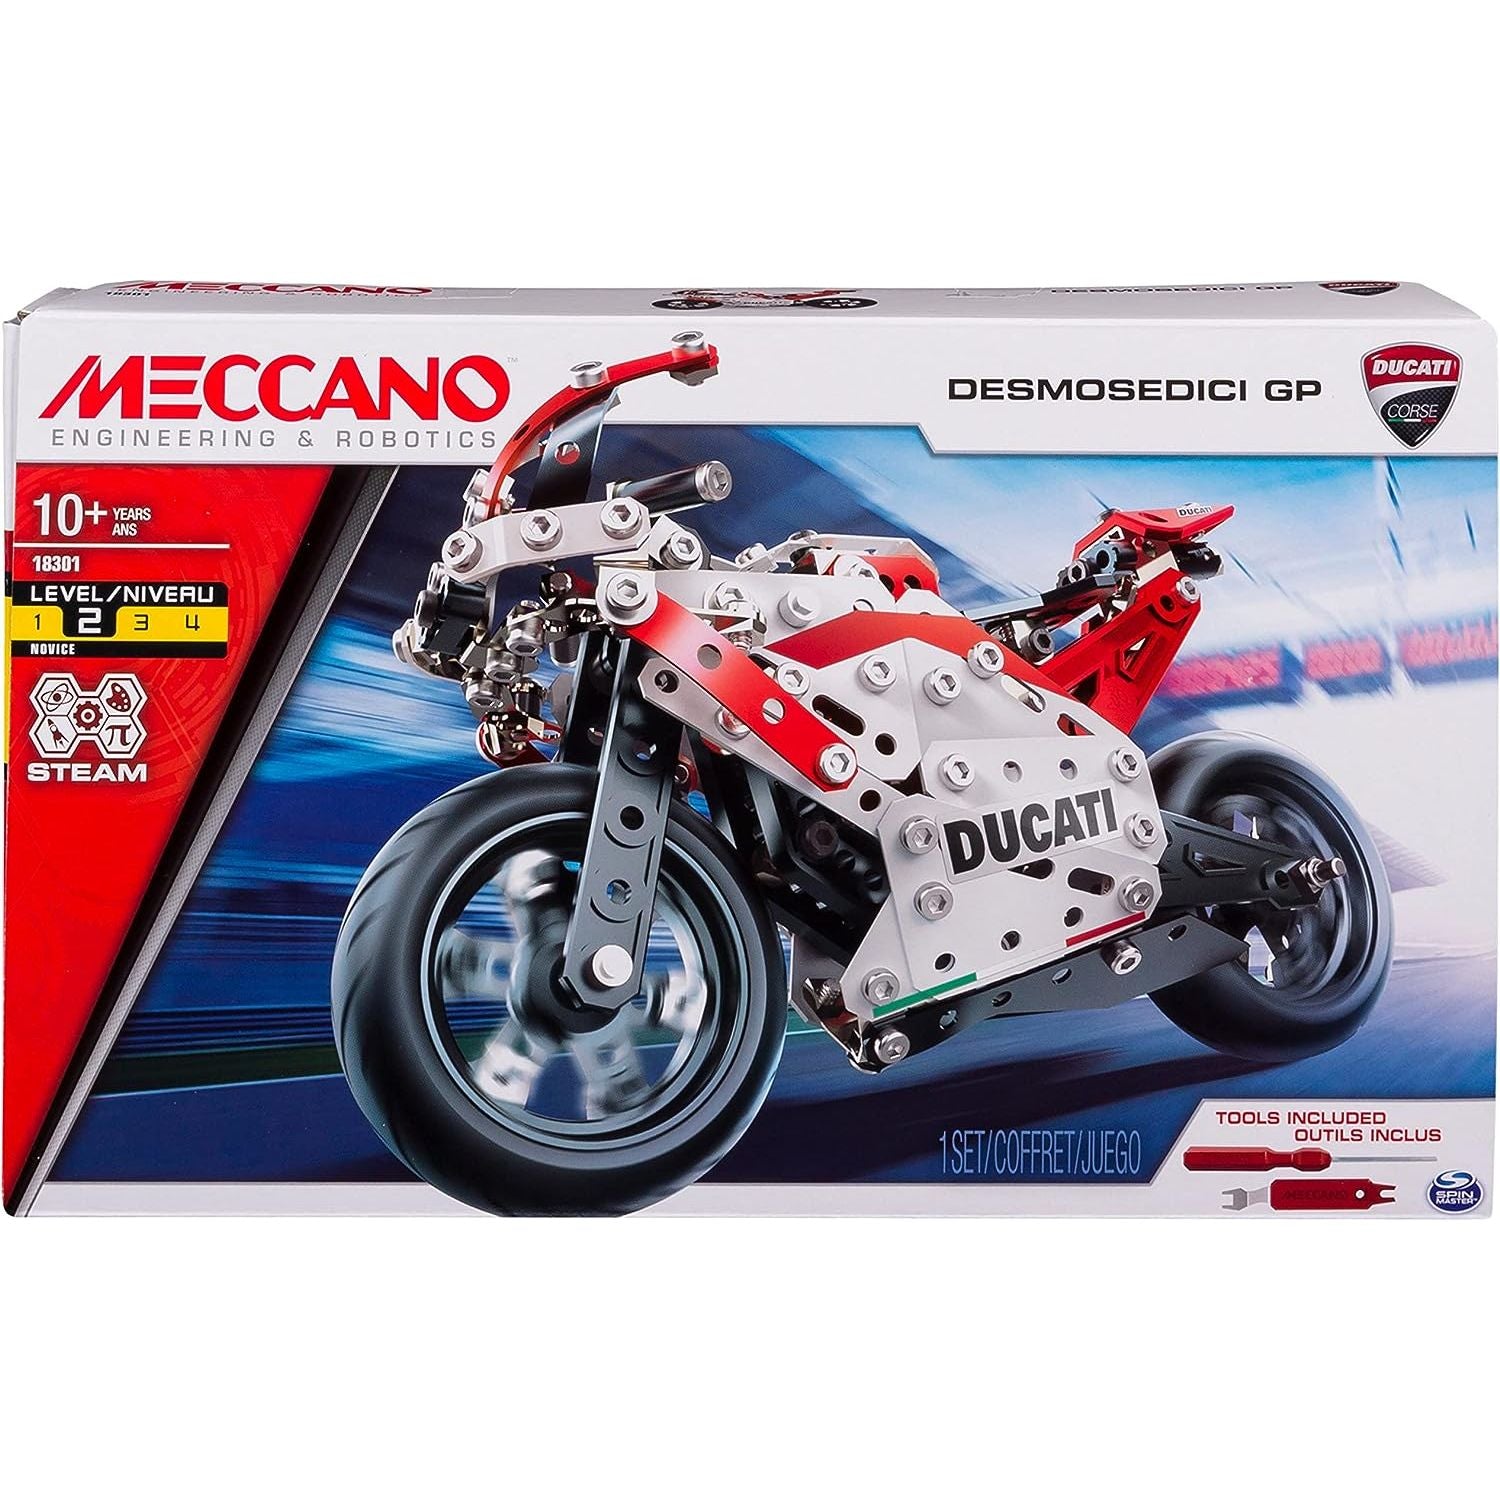 Meccano – Ducati Desmosedici GP S.T.E.A.M Building Kit with Coil-spring Suspension, for Ages 10 and Up